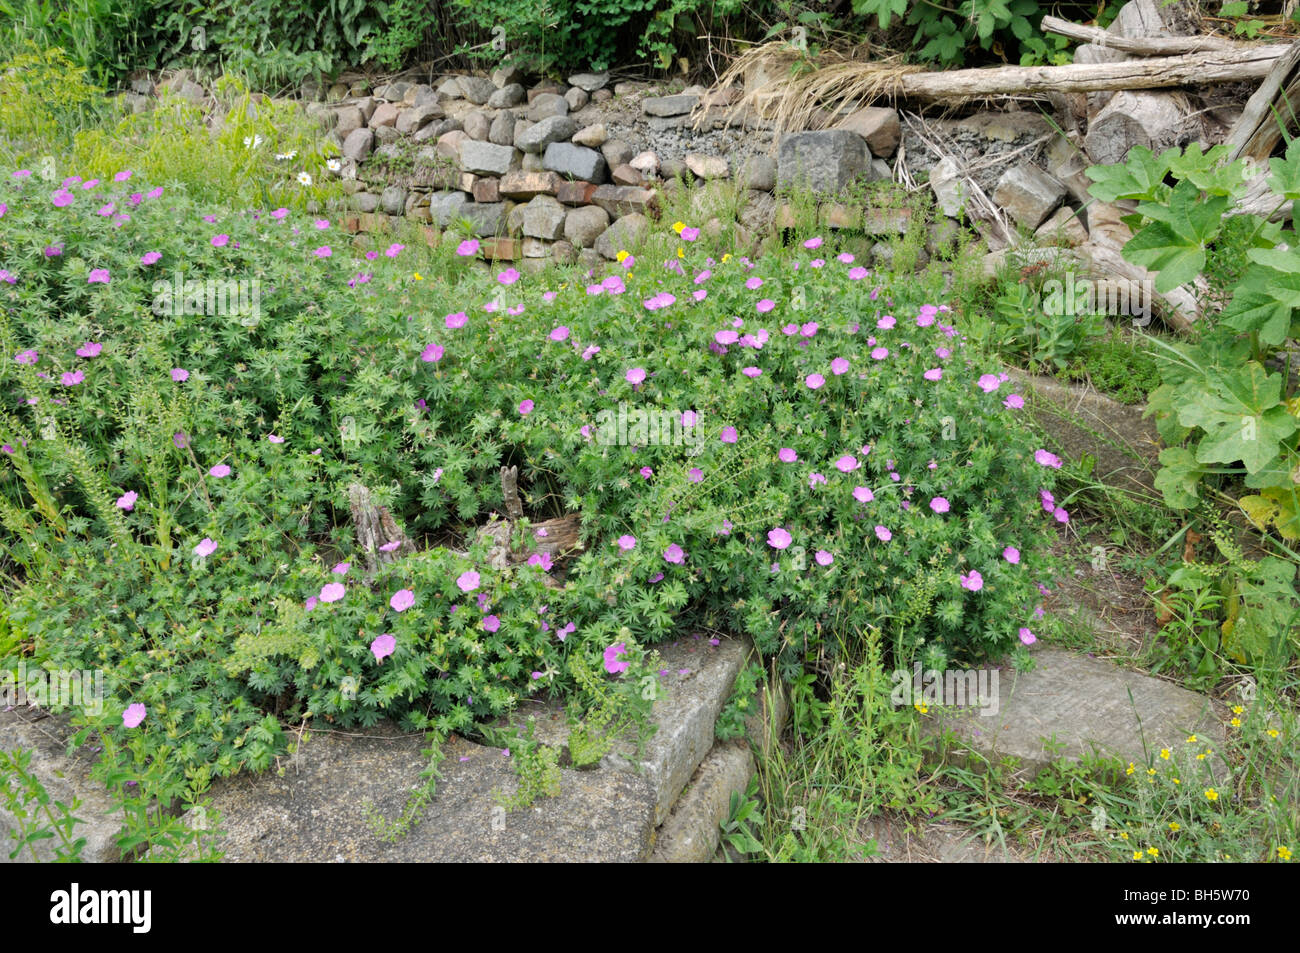 Perennial garden with dry stone wall Stock Photo